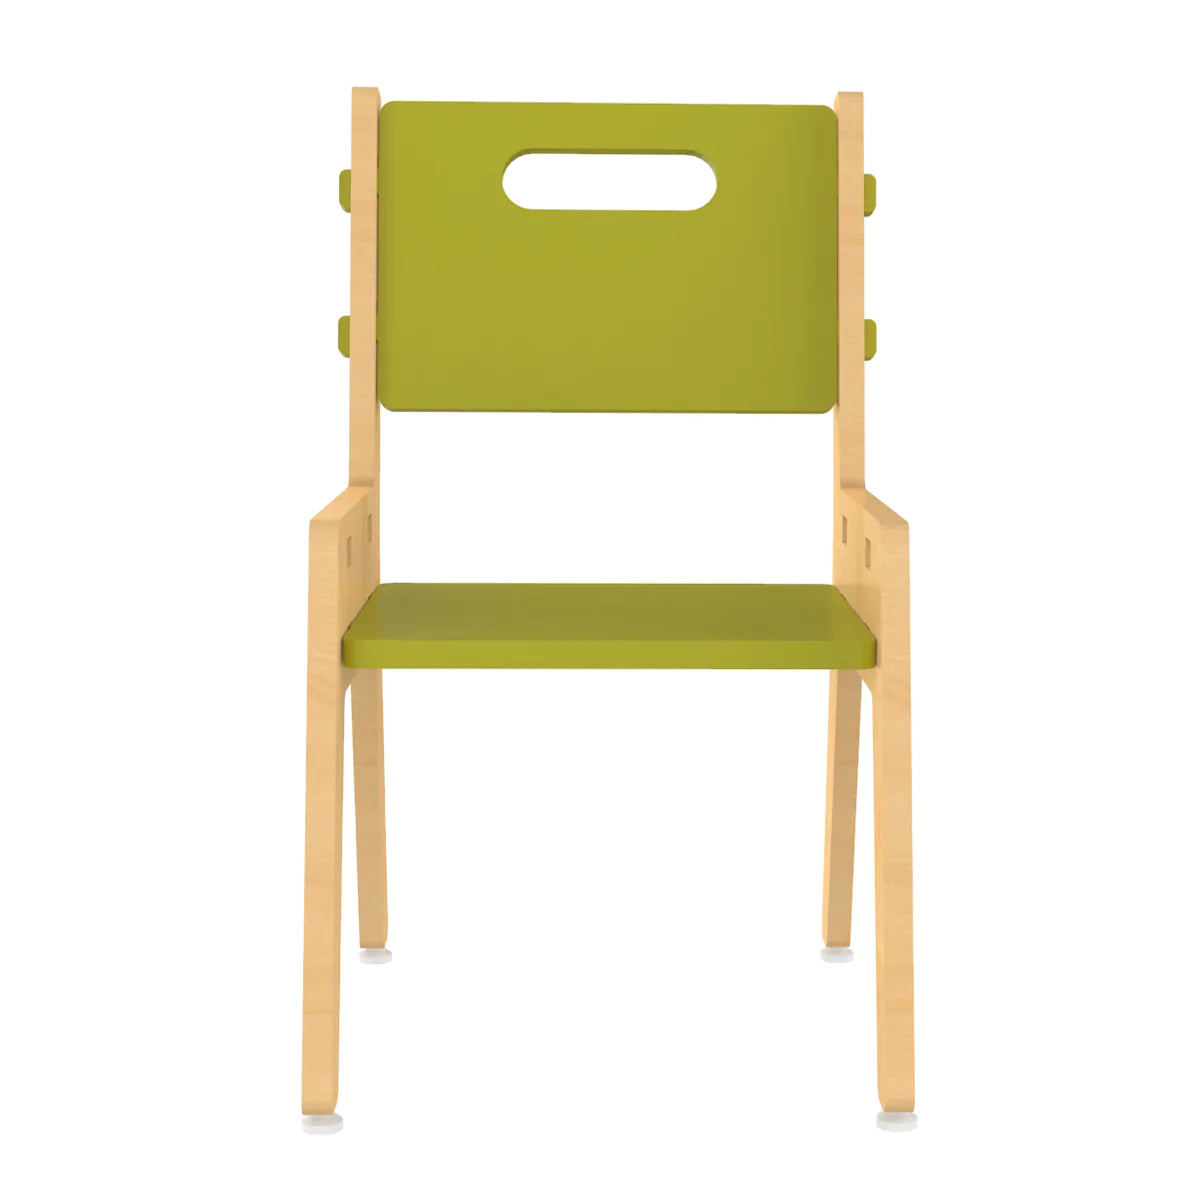 Buy Silver Peach Wooden Chair - Green - Front View - SkilloToys.com